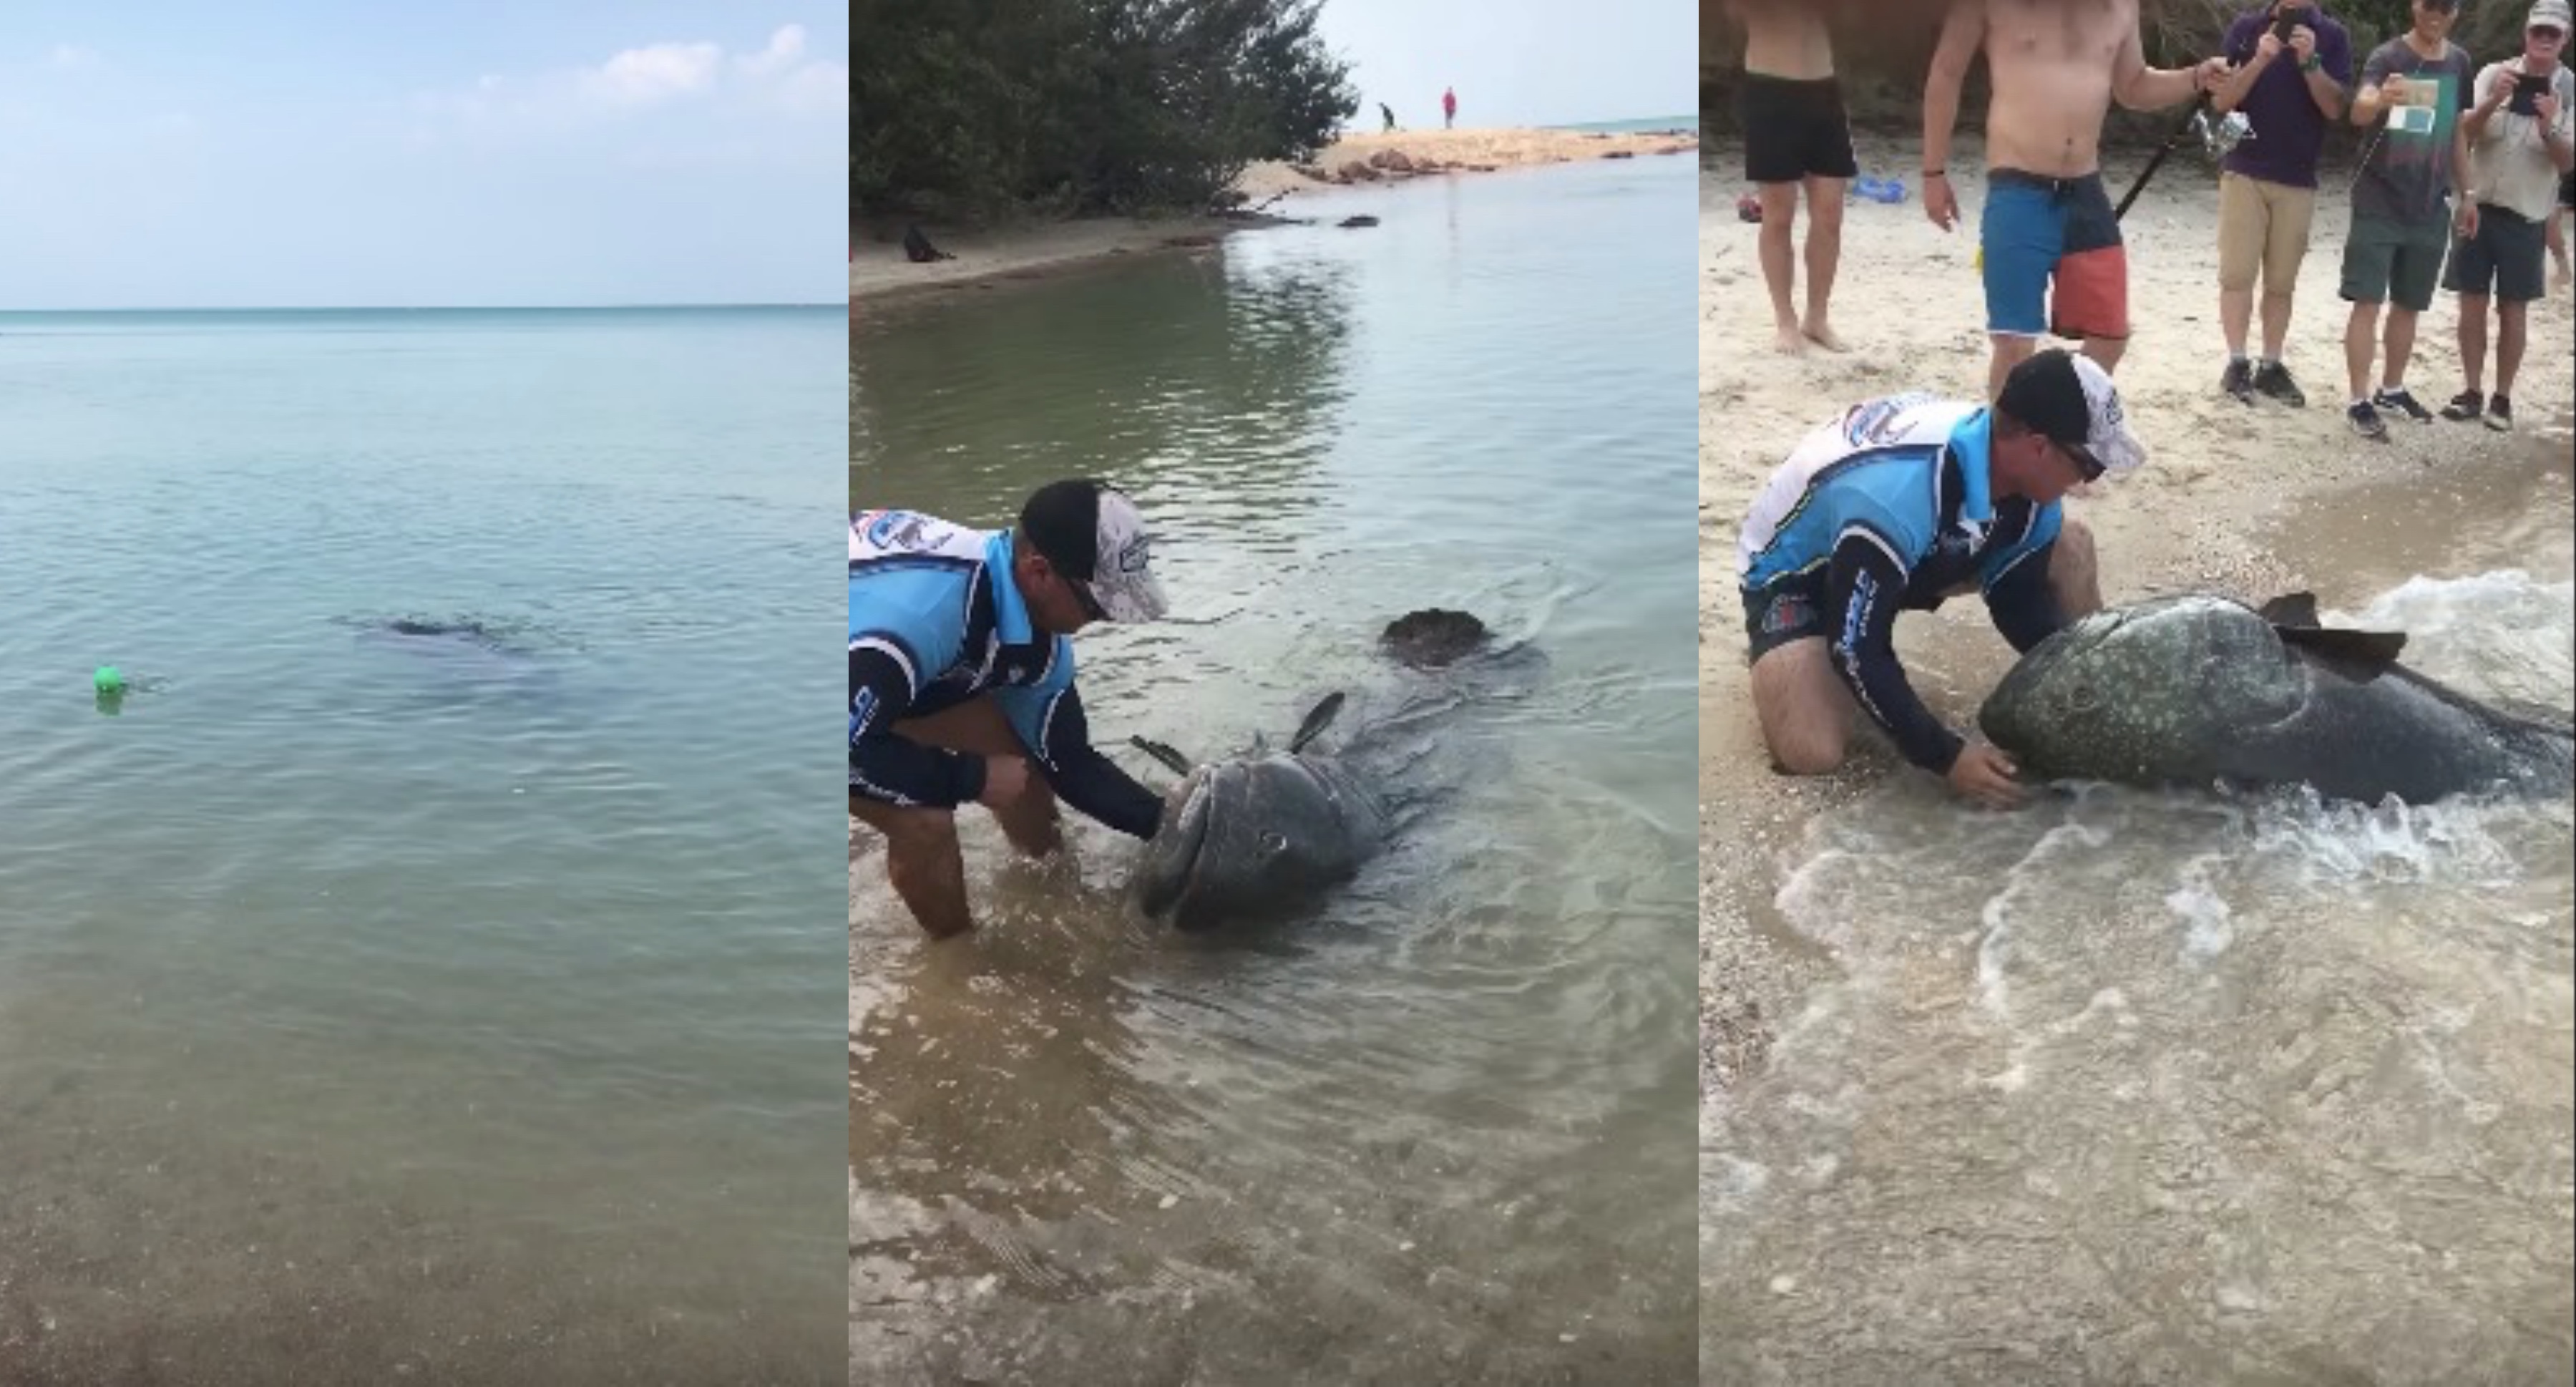 Bros Fishing On The Beach Catch MASSIVE Queensland Grouper Big Enough
To Swallow Your Dog – BroBible